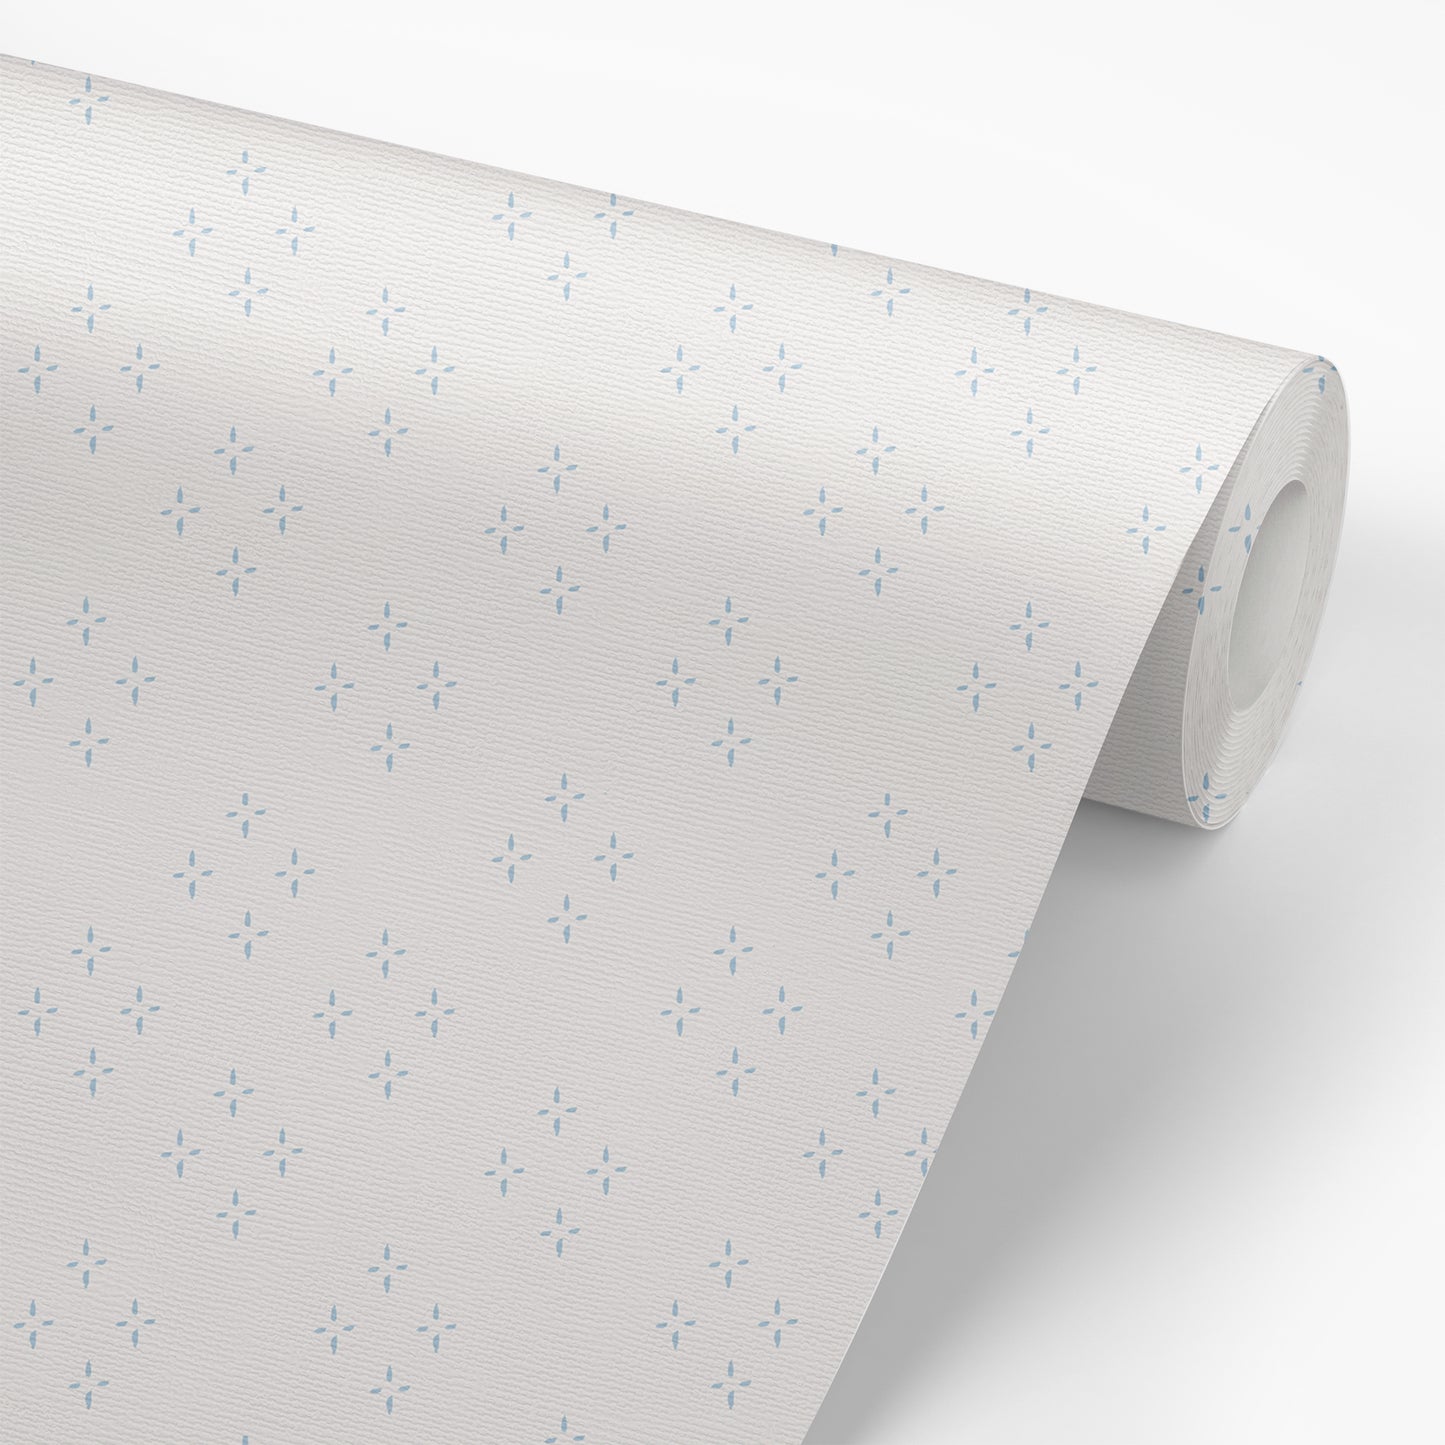 Wallpaper panel featuring our diamond and star shaped Isla peel and stick wallpaper by Jackie O'Bosky. This classic pattern is made of blue dots on a creamy white background.